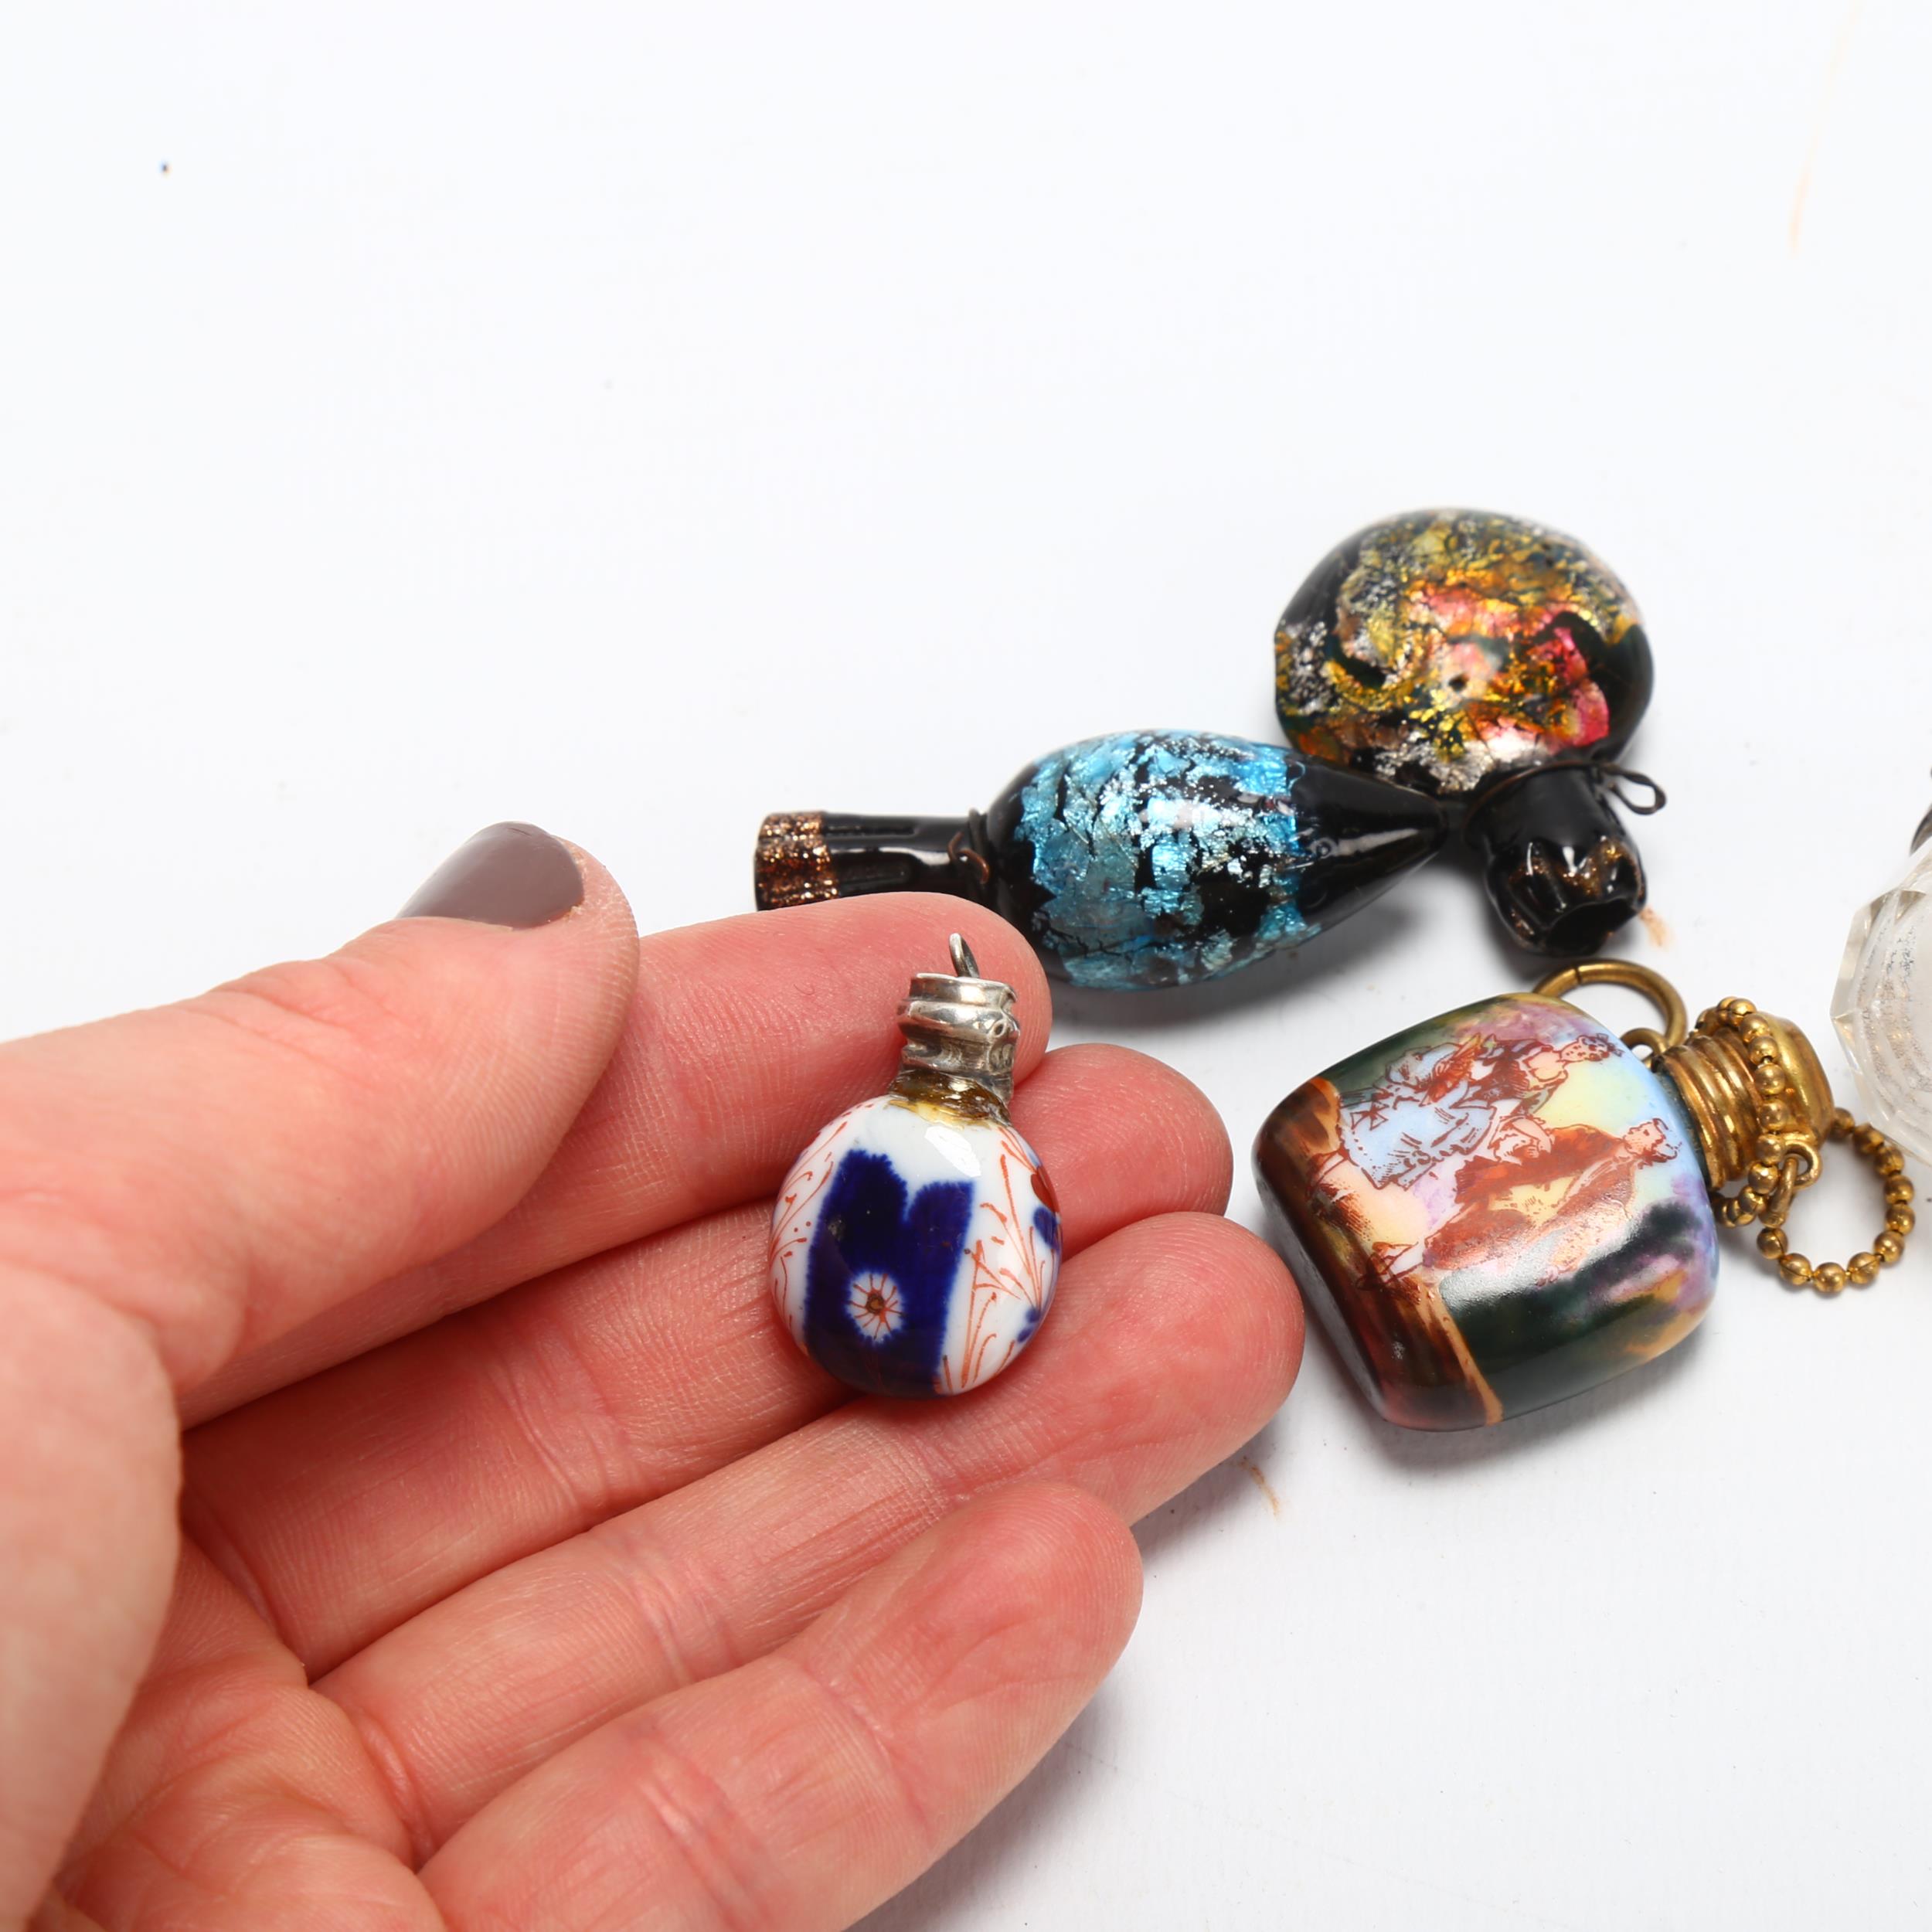 A group of miniature porcelain enamel and glass pendant perfume flasks (5) - Image 3 of 3